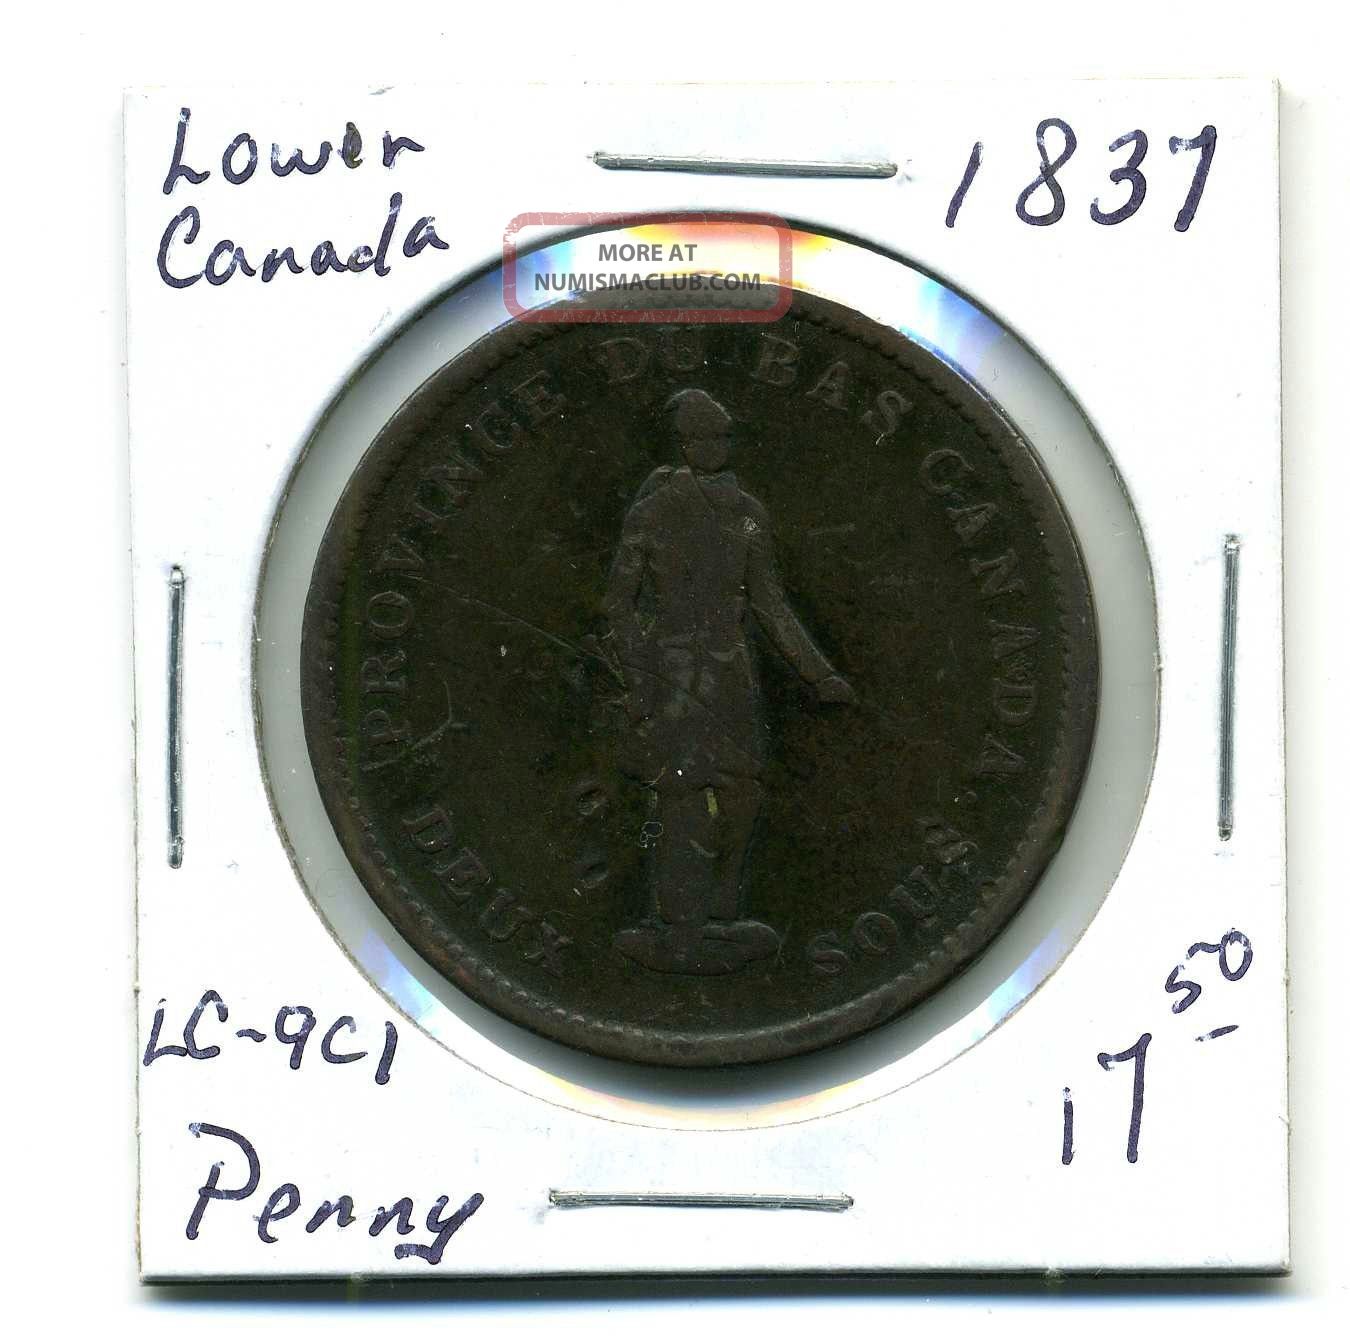 Lower Canada Quebec Penny Token 1837;lc - 9c1,  Very Good+ Coins: Canada photo